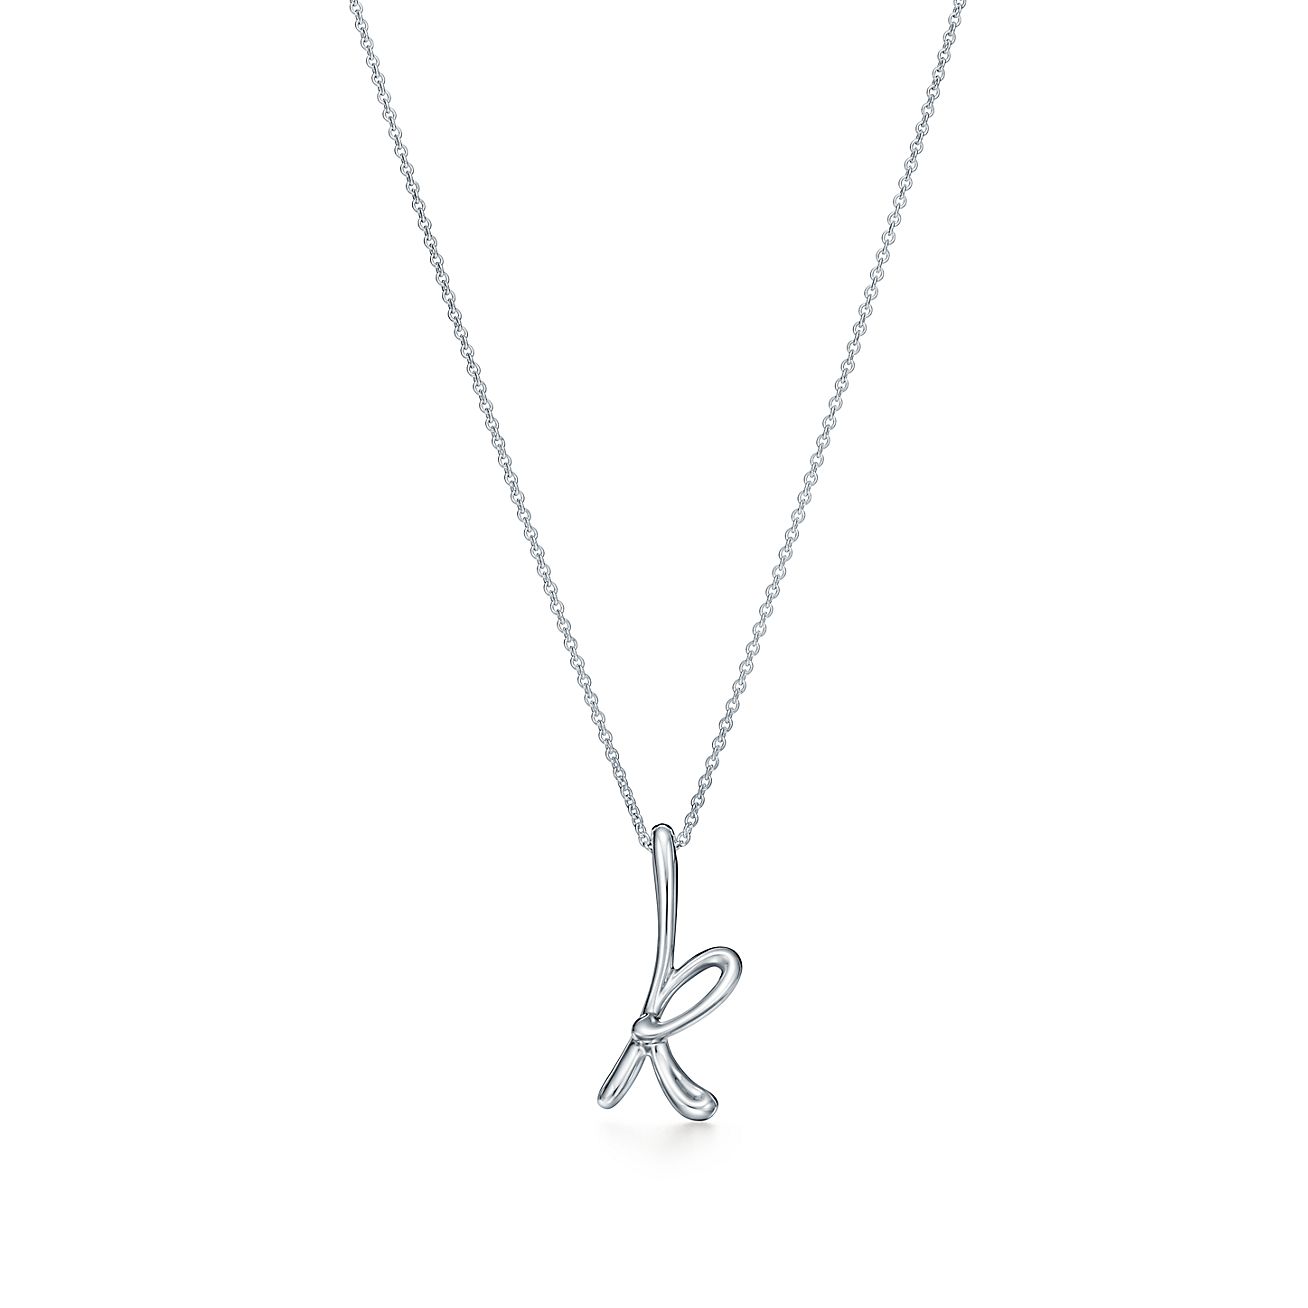 Elsa Peretti® letter pendant. Sterling silver, small. Letters A-Z available. | Tiffany & Co.